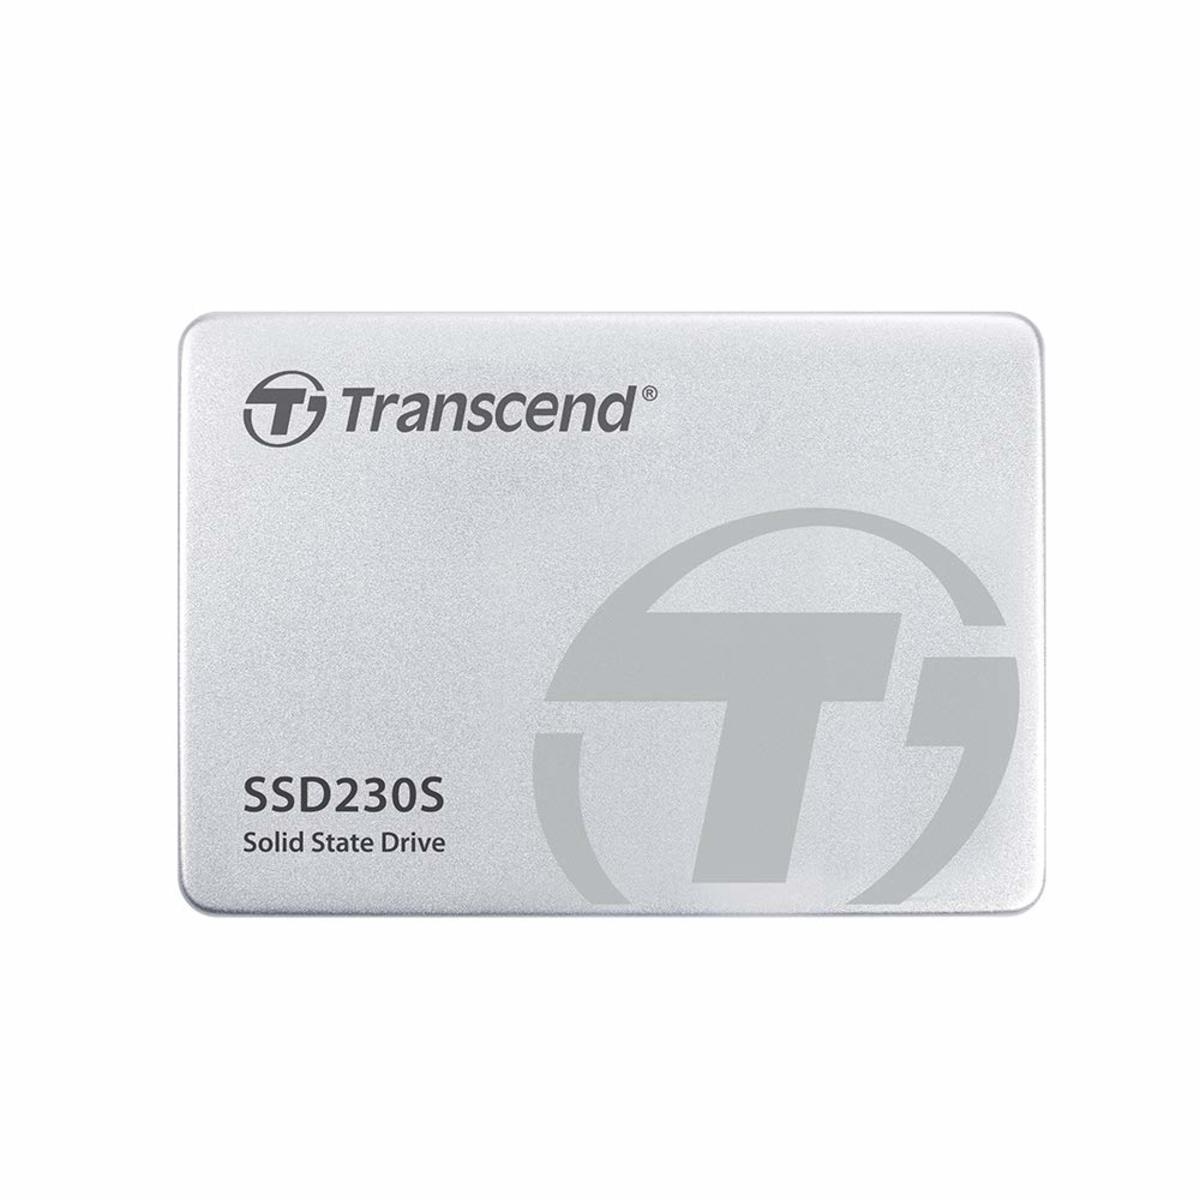 Transcned Solid State Drive TS256GSSD230S 256GB